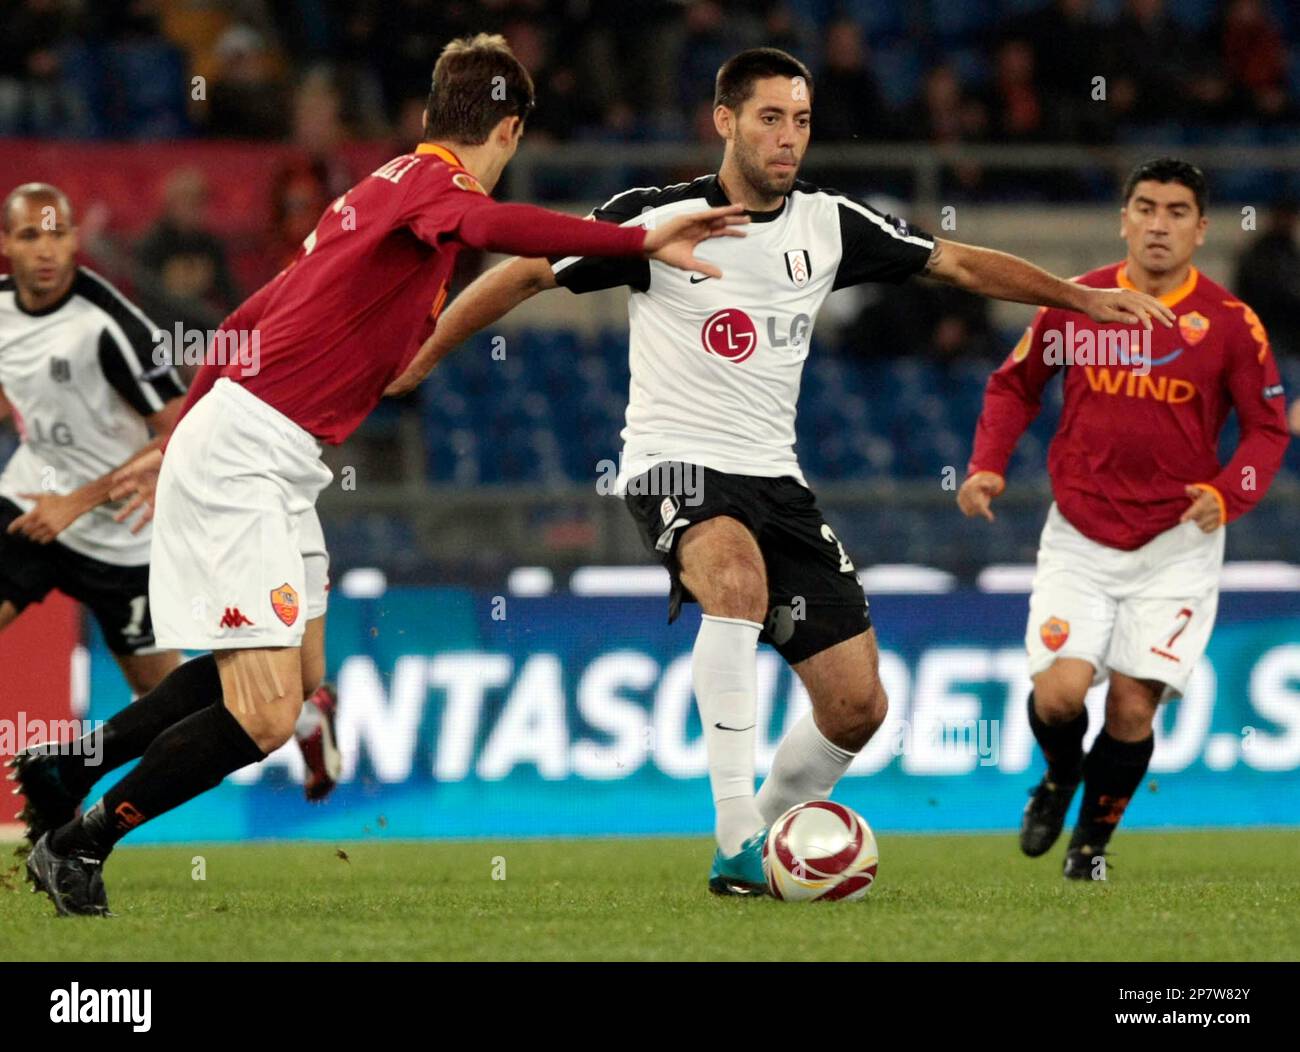 Fulham' s Clint Dempsey, center, dribbles past AS Roma's Marco